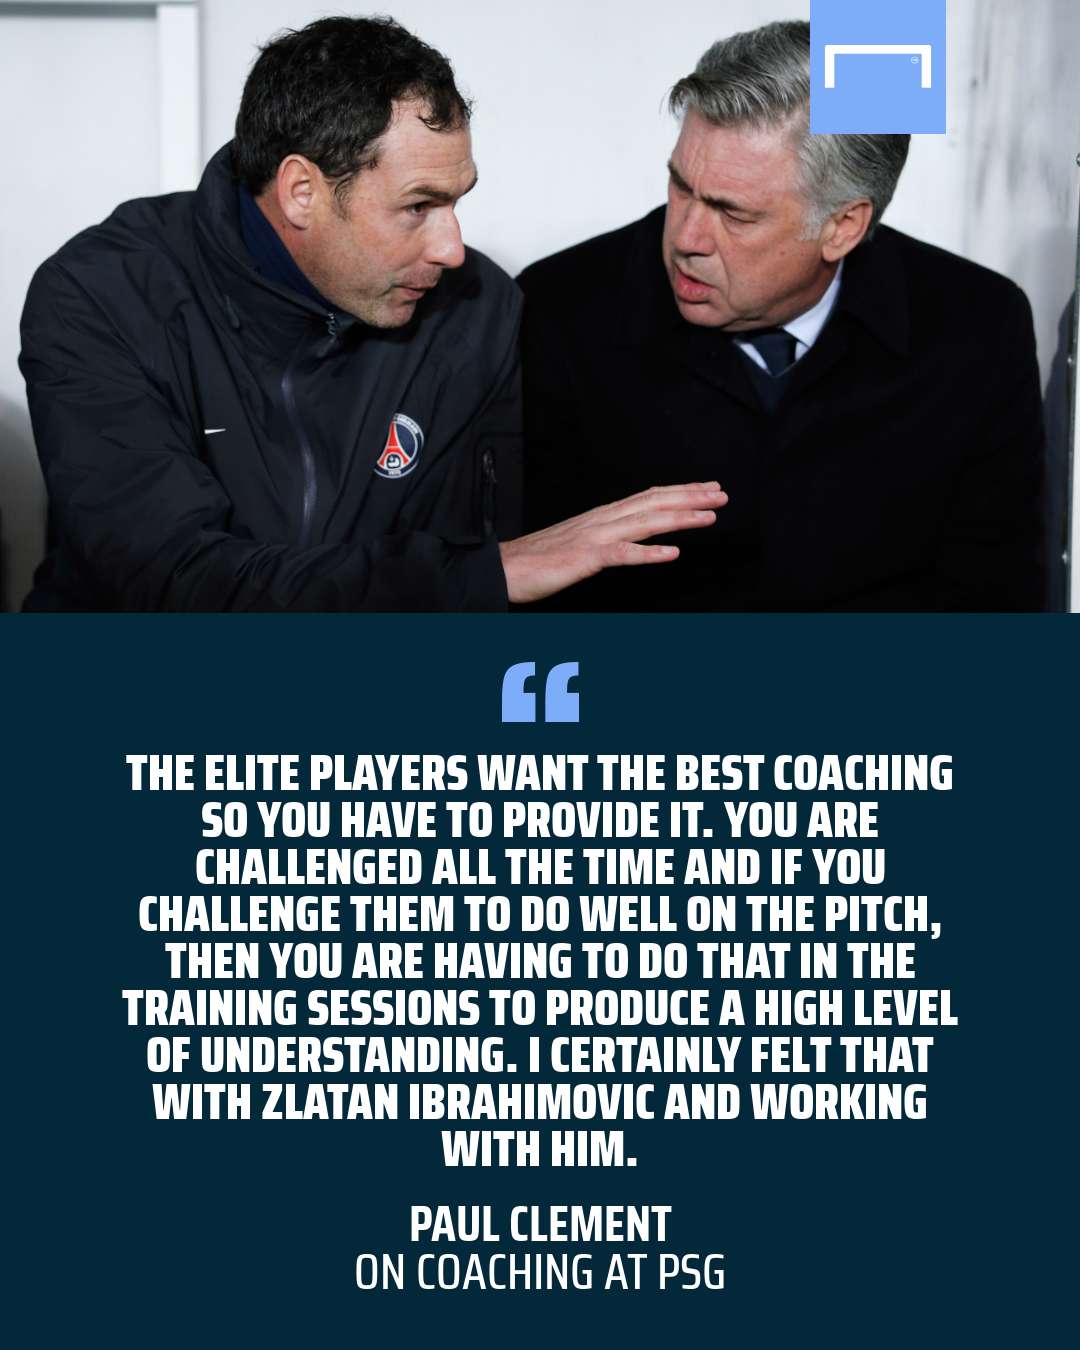 Paul Clement quote GFX on PSG